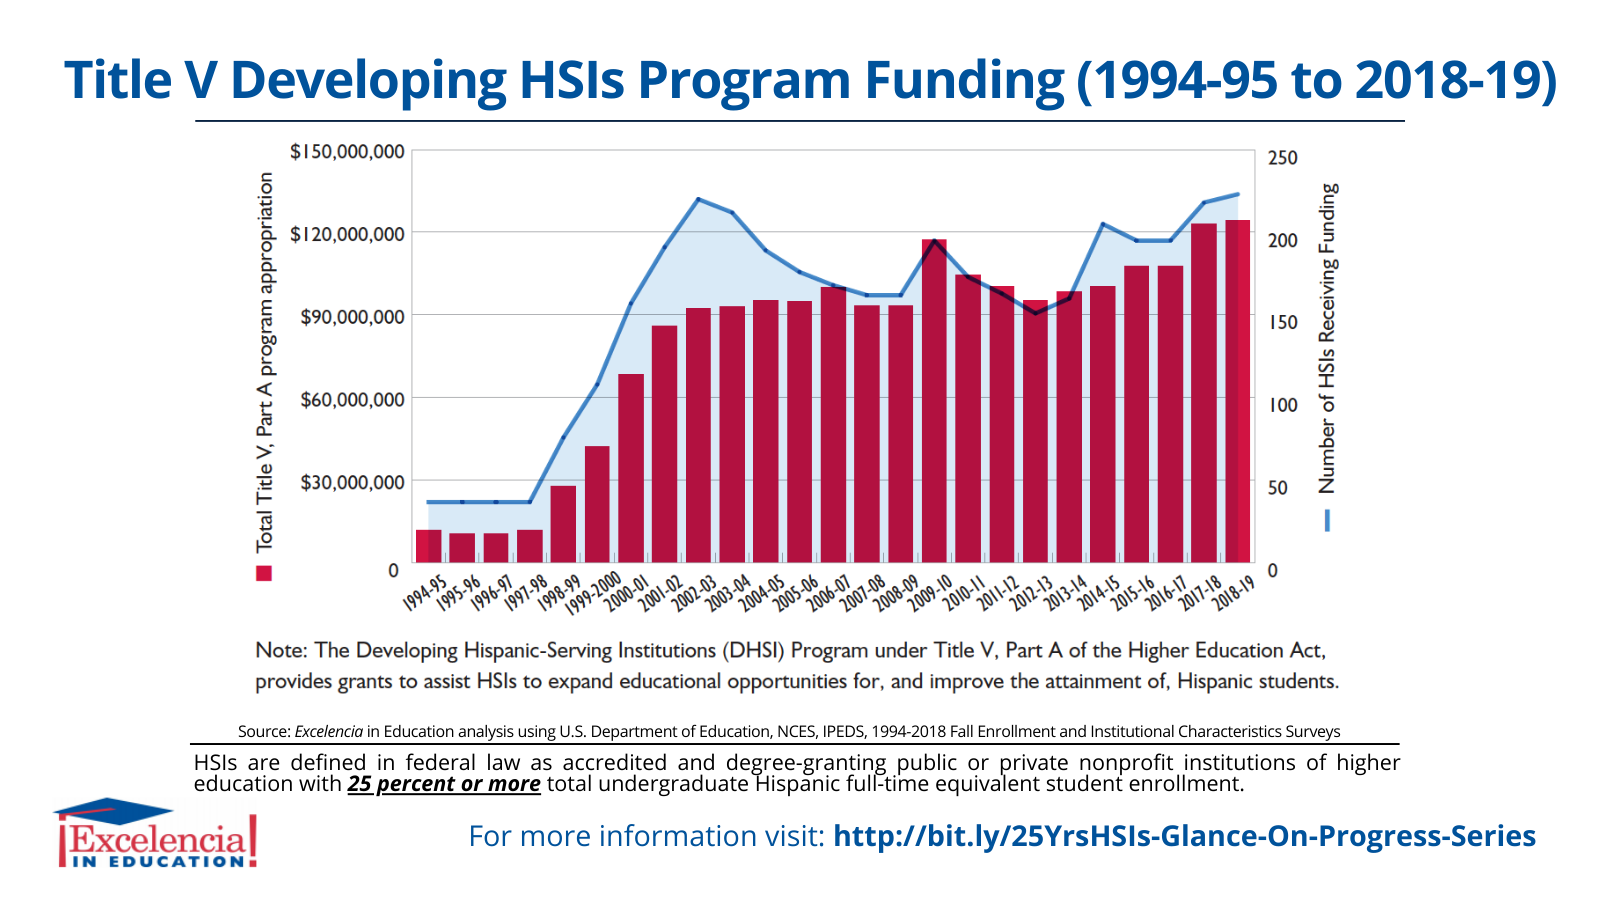 Infographic-Title V Developing HSIs Program Funding 1994-95 to 2018-19